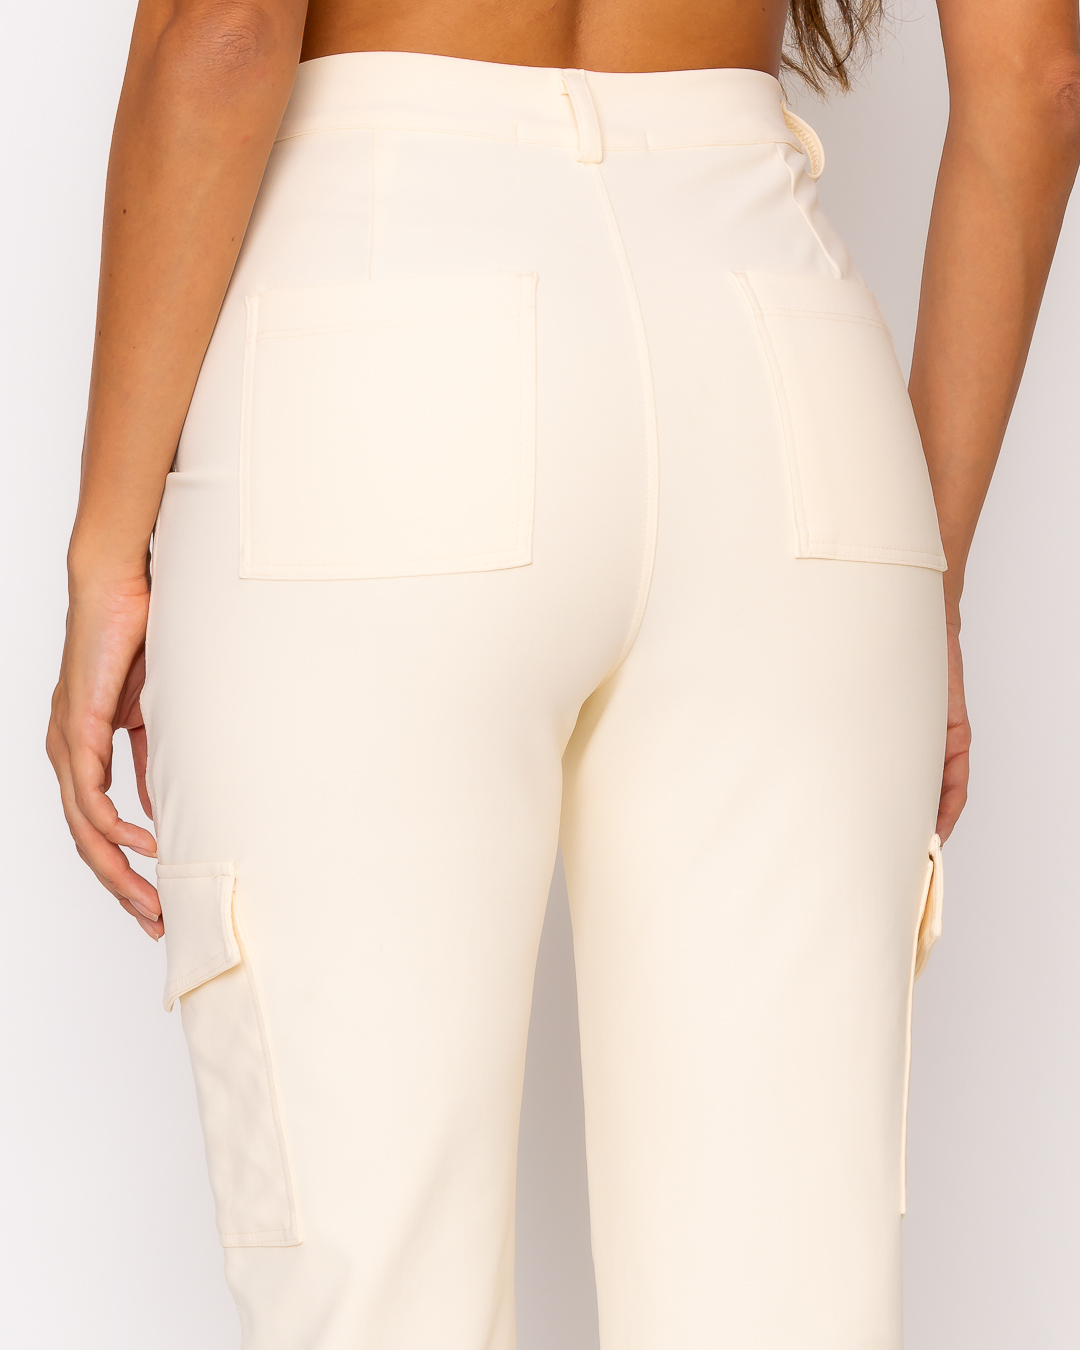 Miss Misses - Miss Misses Pants With Pockets On The Sides Beige - 19104OFF